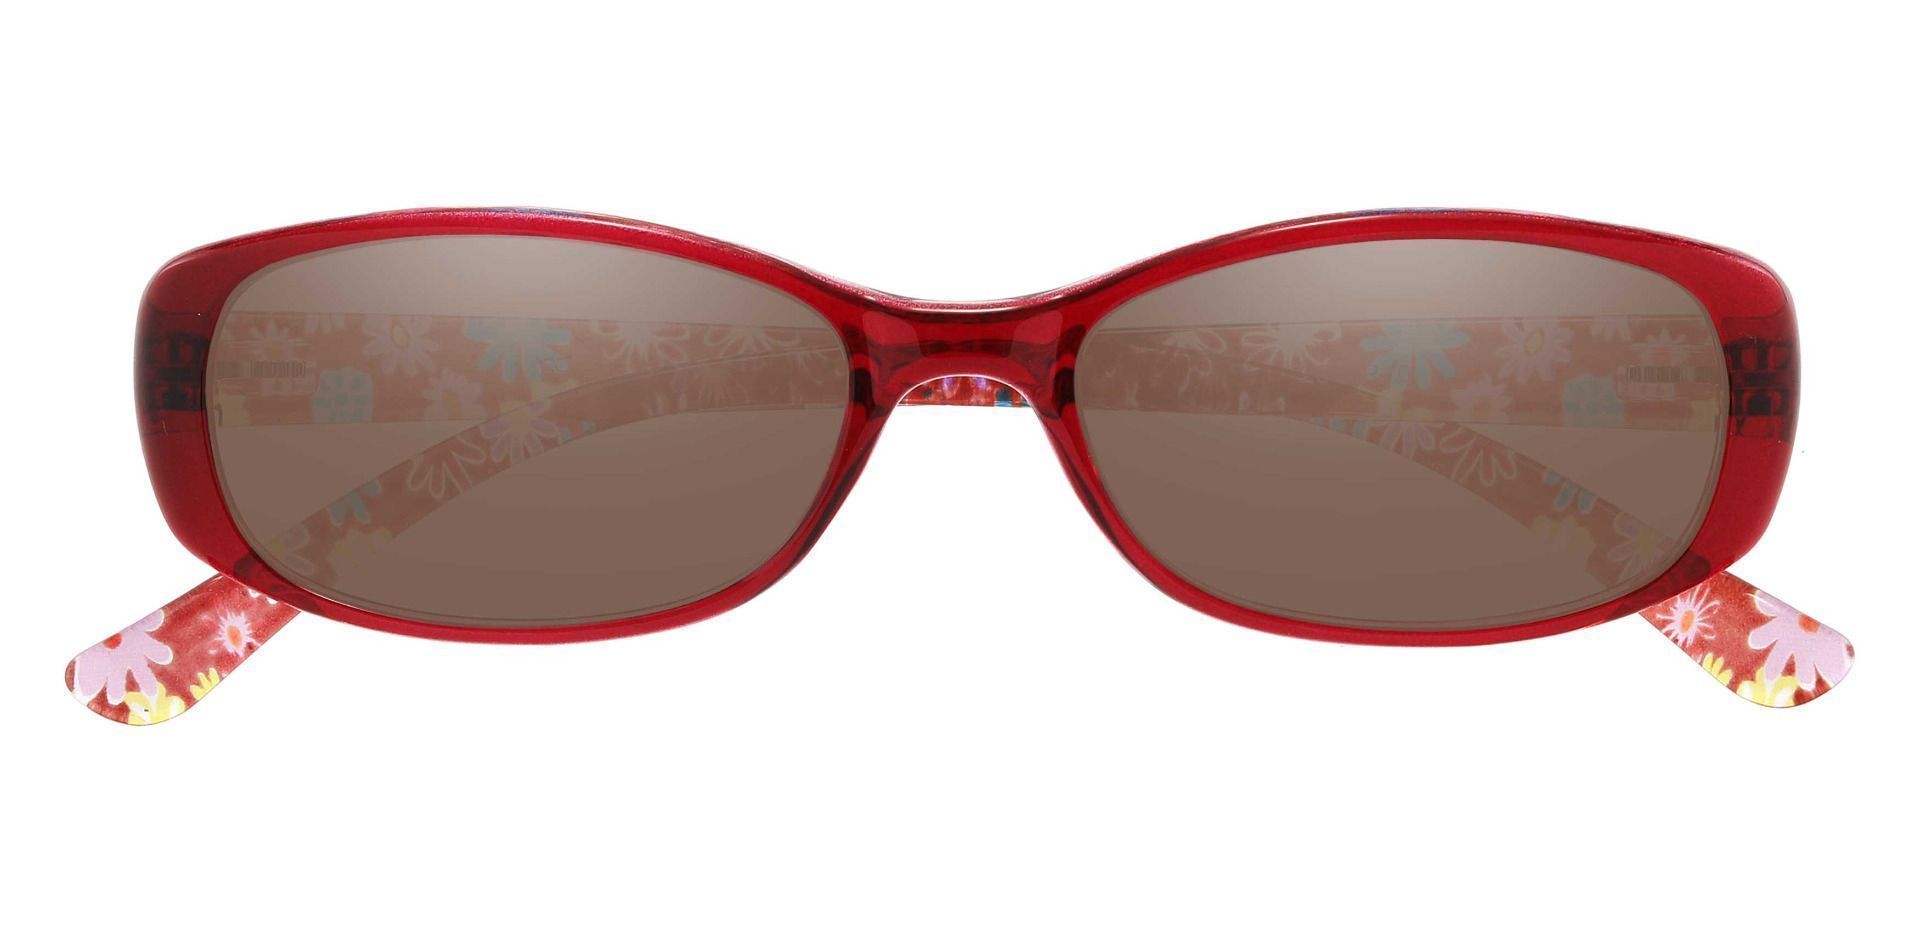 Bethesda Rectangle Non-Rx Sunglasses - Red Frame With Brown Lenses